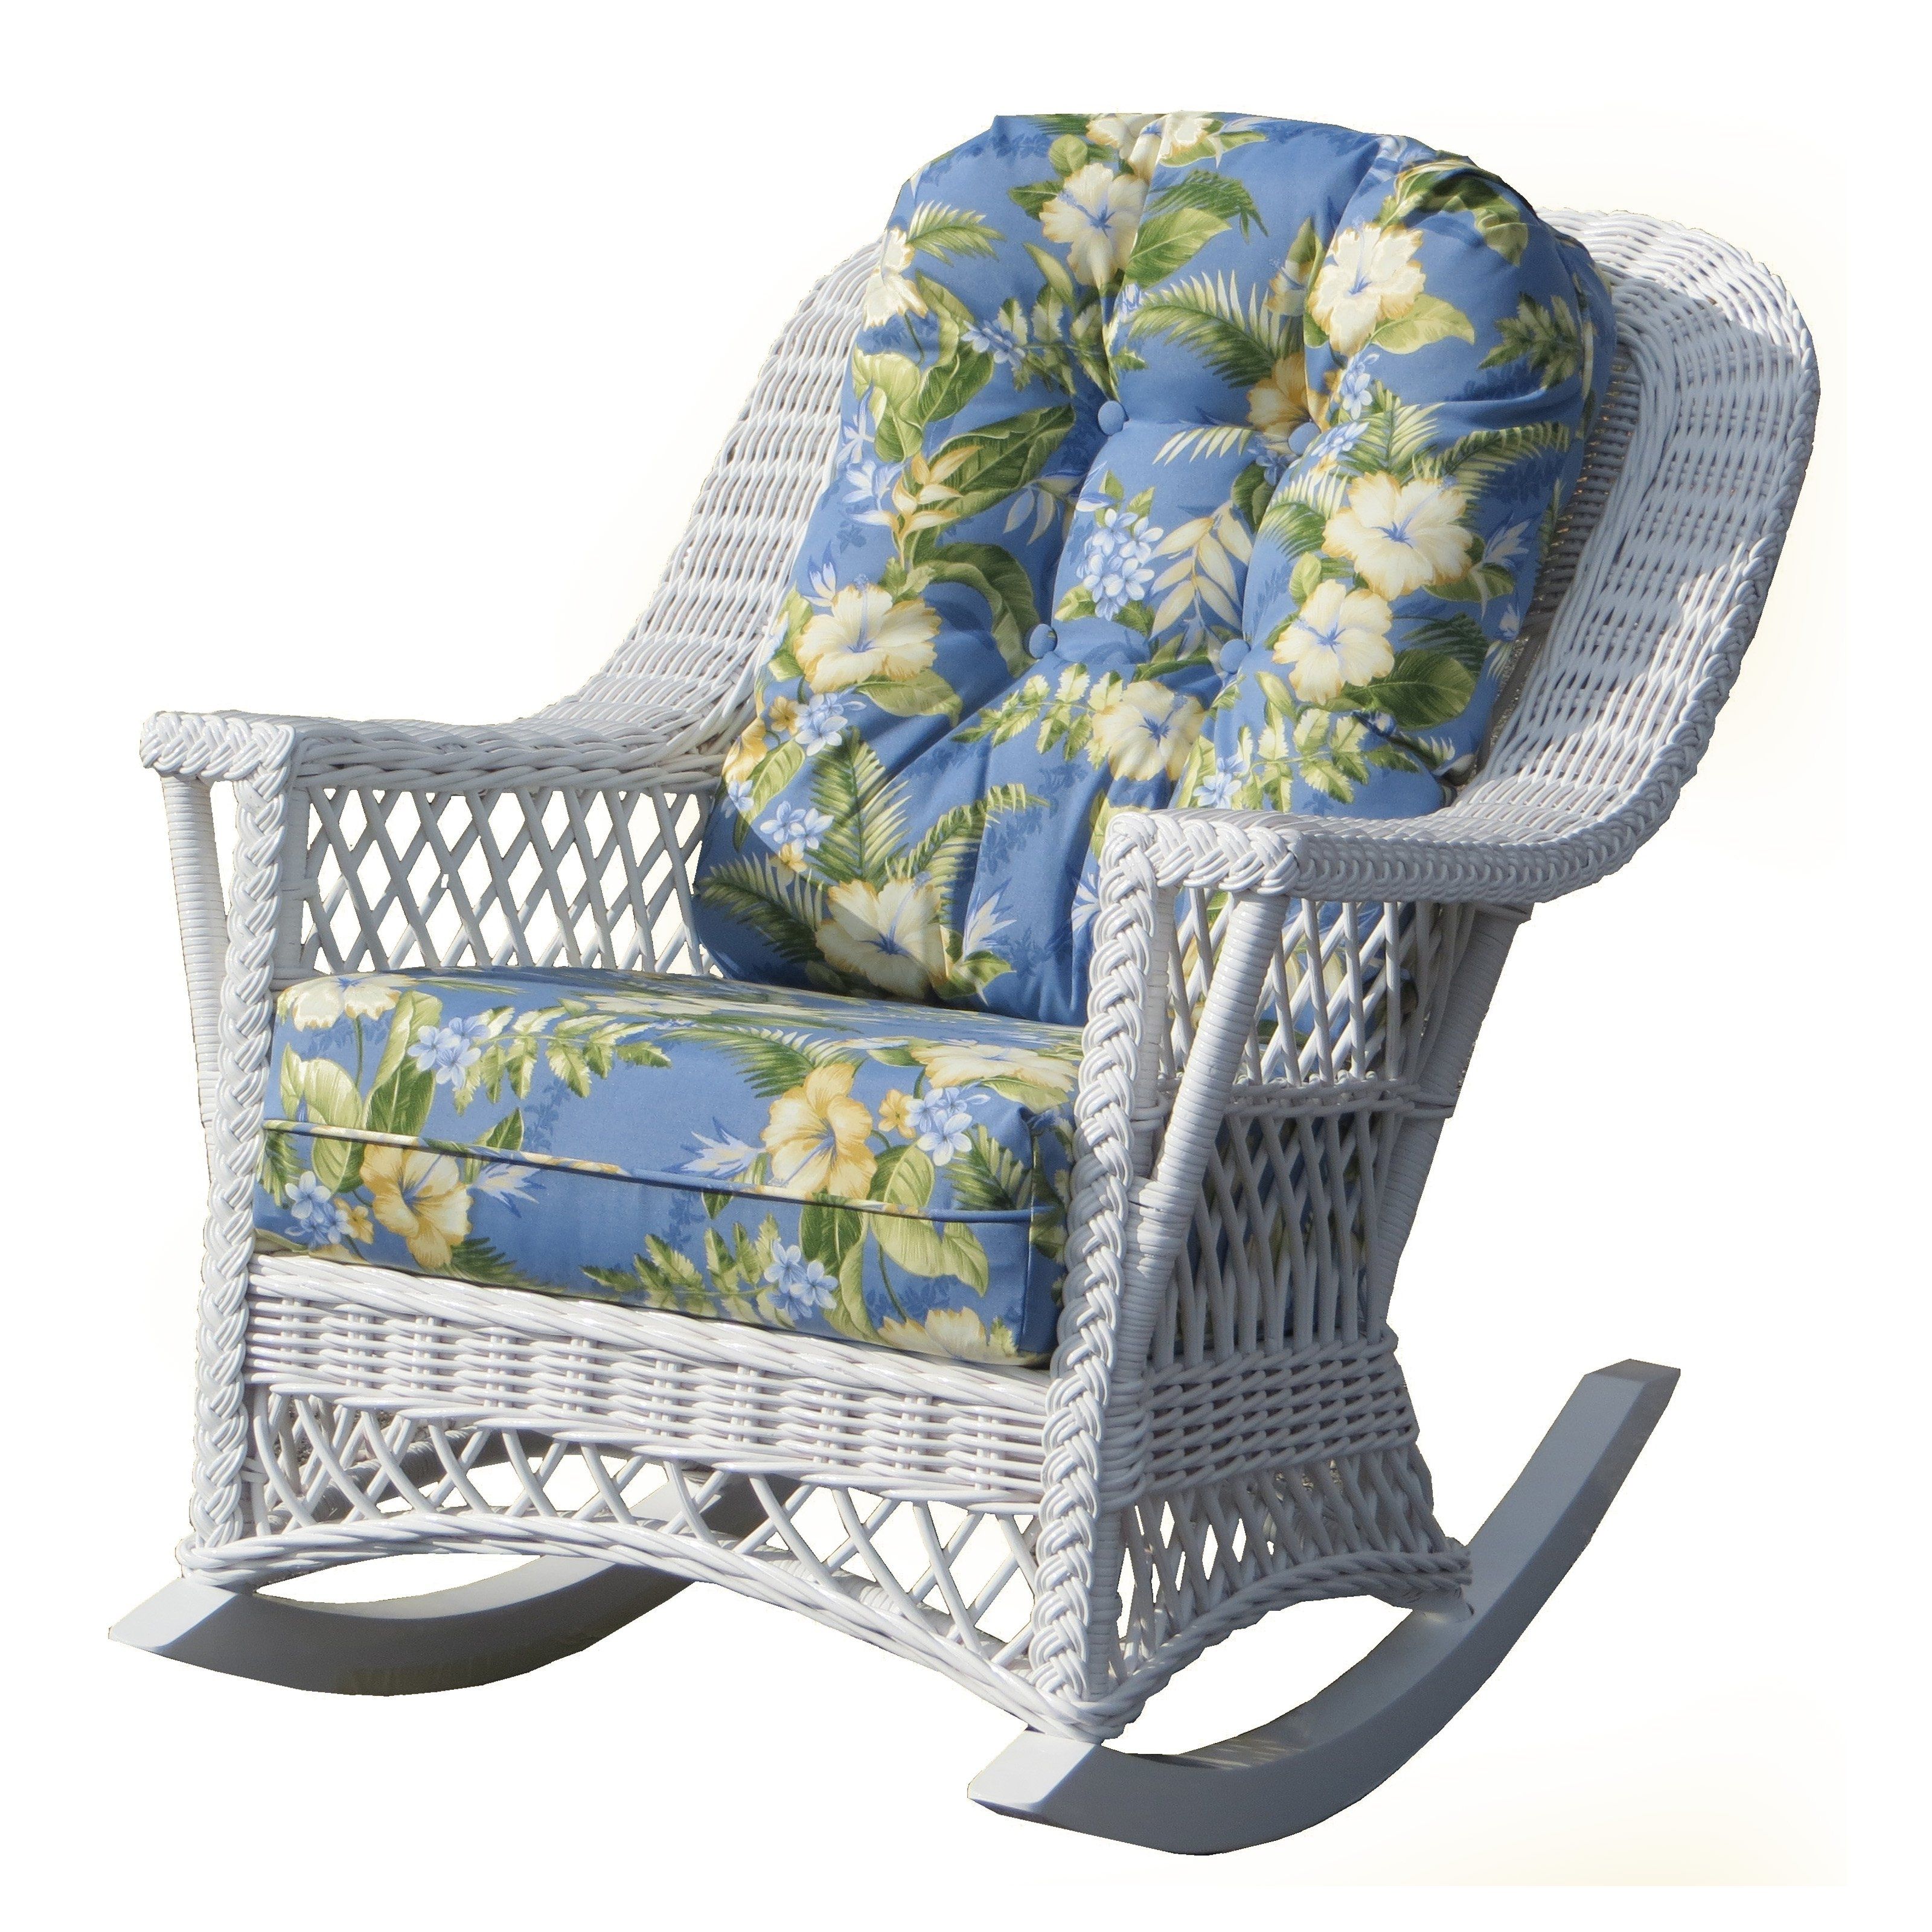 Country Wicker Rocking Chair – Indoor/covered Porch | Hayneedle Within Indoor Wicker Rocking Chairs (View 8 of 15)